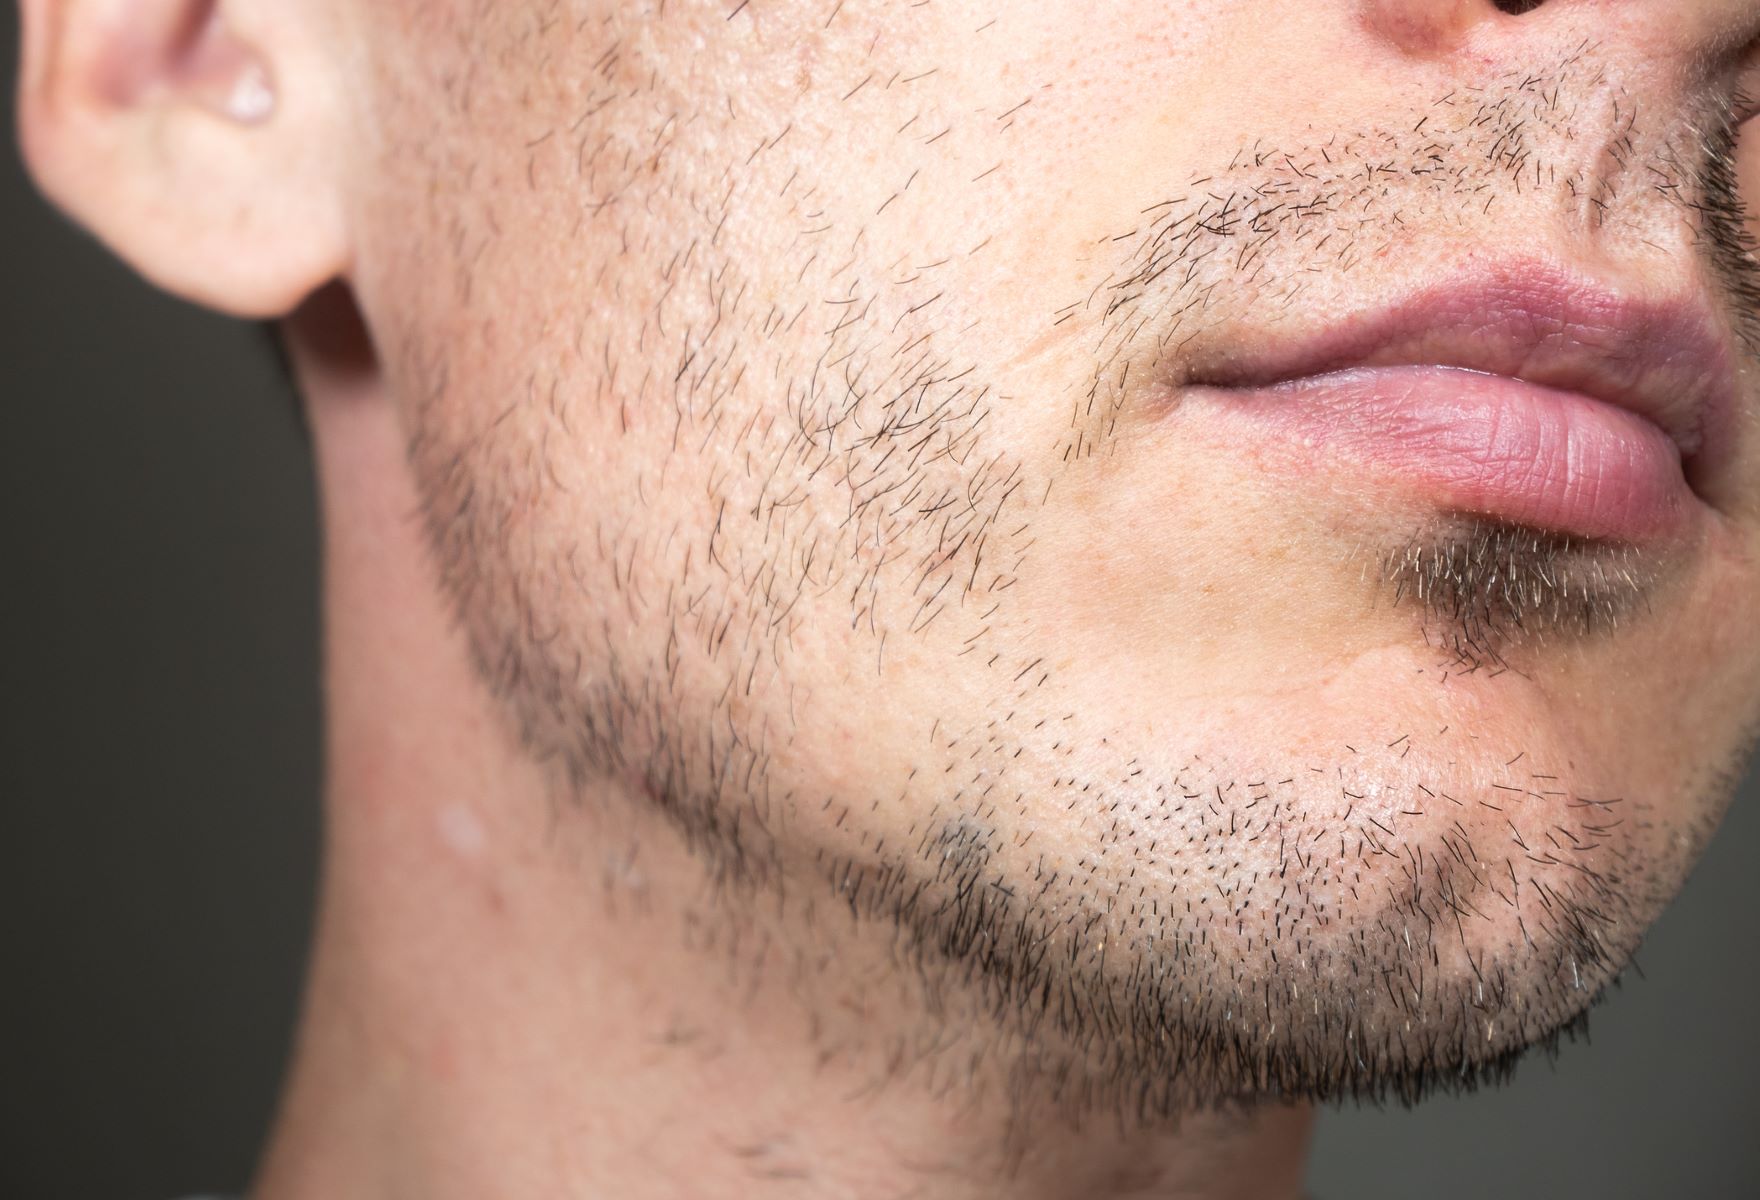 Sparse, uneven beard growth on a young man